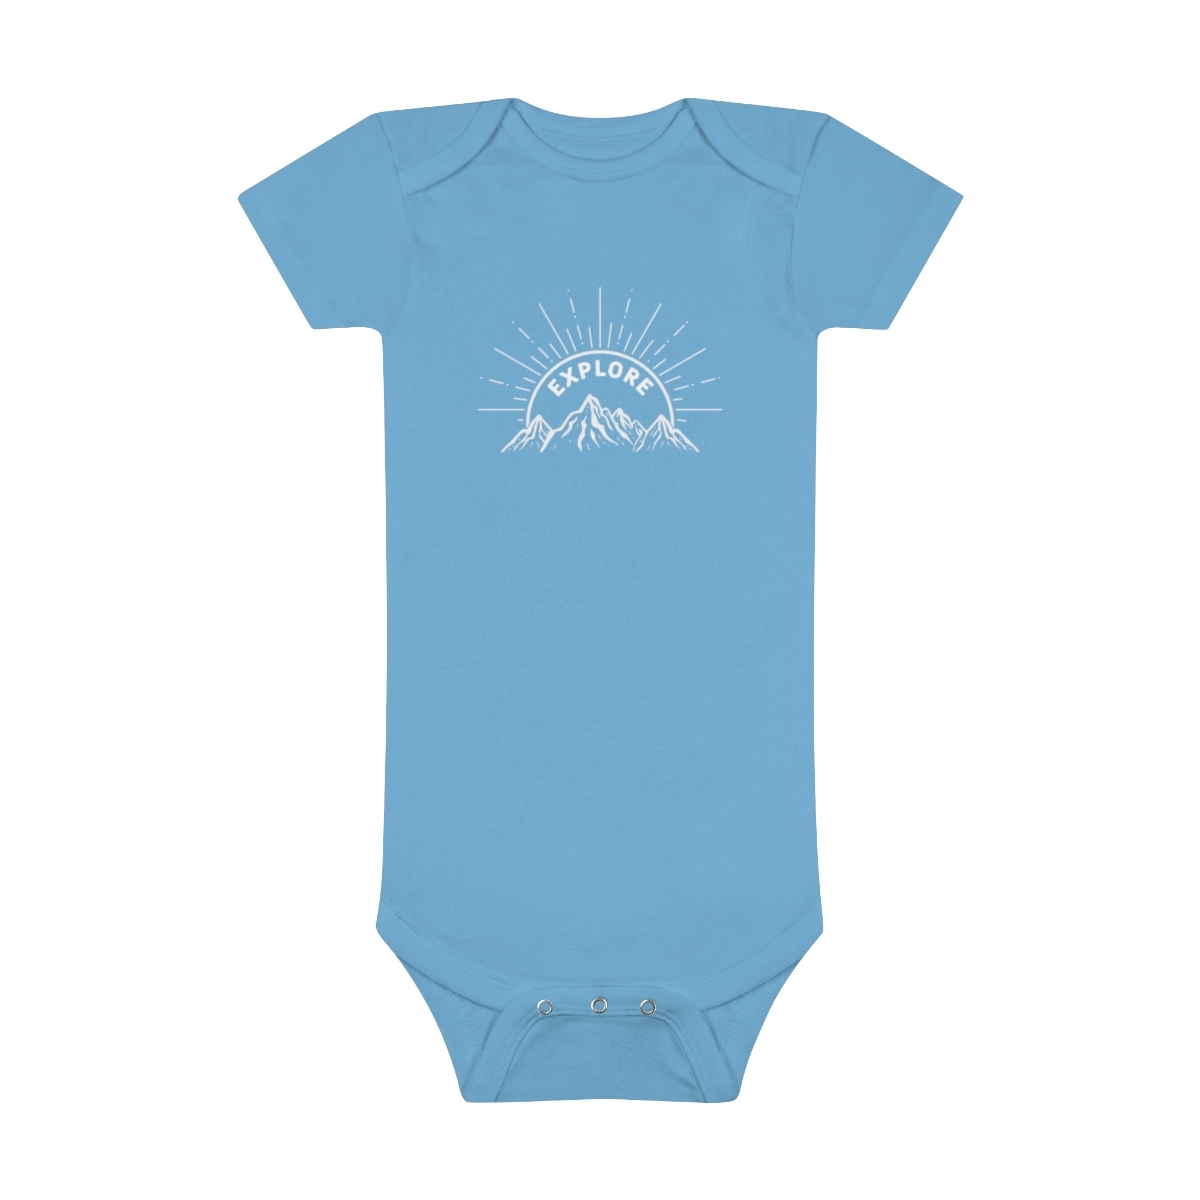 Primary image for Baby Short Sleeve Onesie - 100% Cotton Rib with Expandable Lap Shoulder Neckline